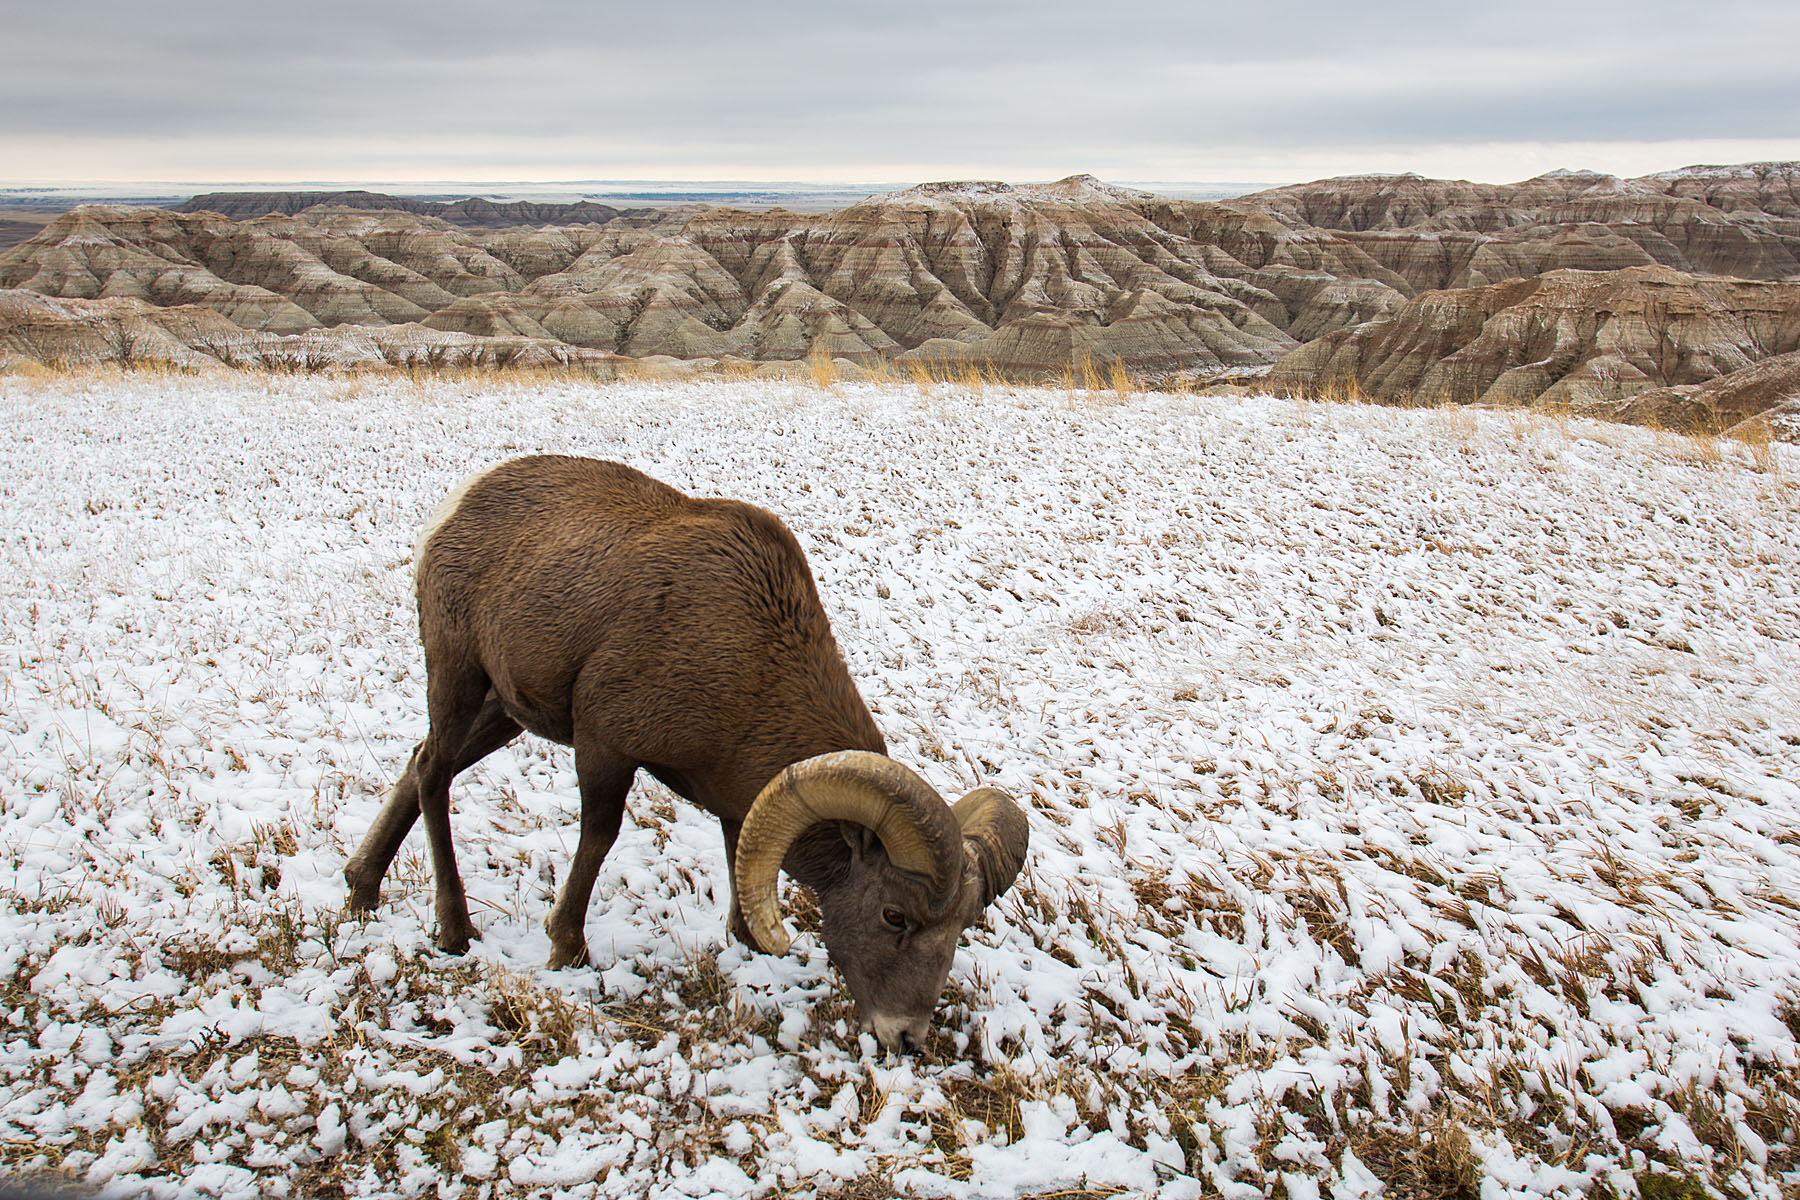 Bighorn sheep in the Badlands after an October 2012 snow.  I was on the wrong side of the car so I passed the camera to my future fiancé Sue, who took this shot.  Click for next photo.